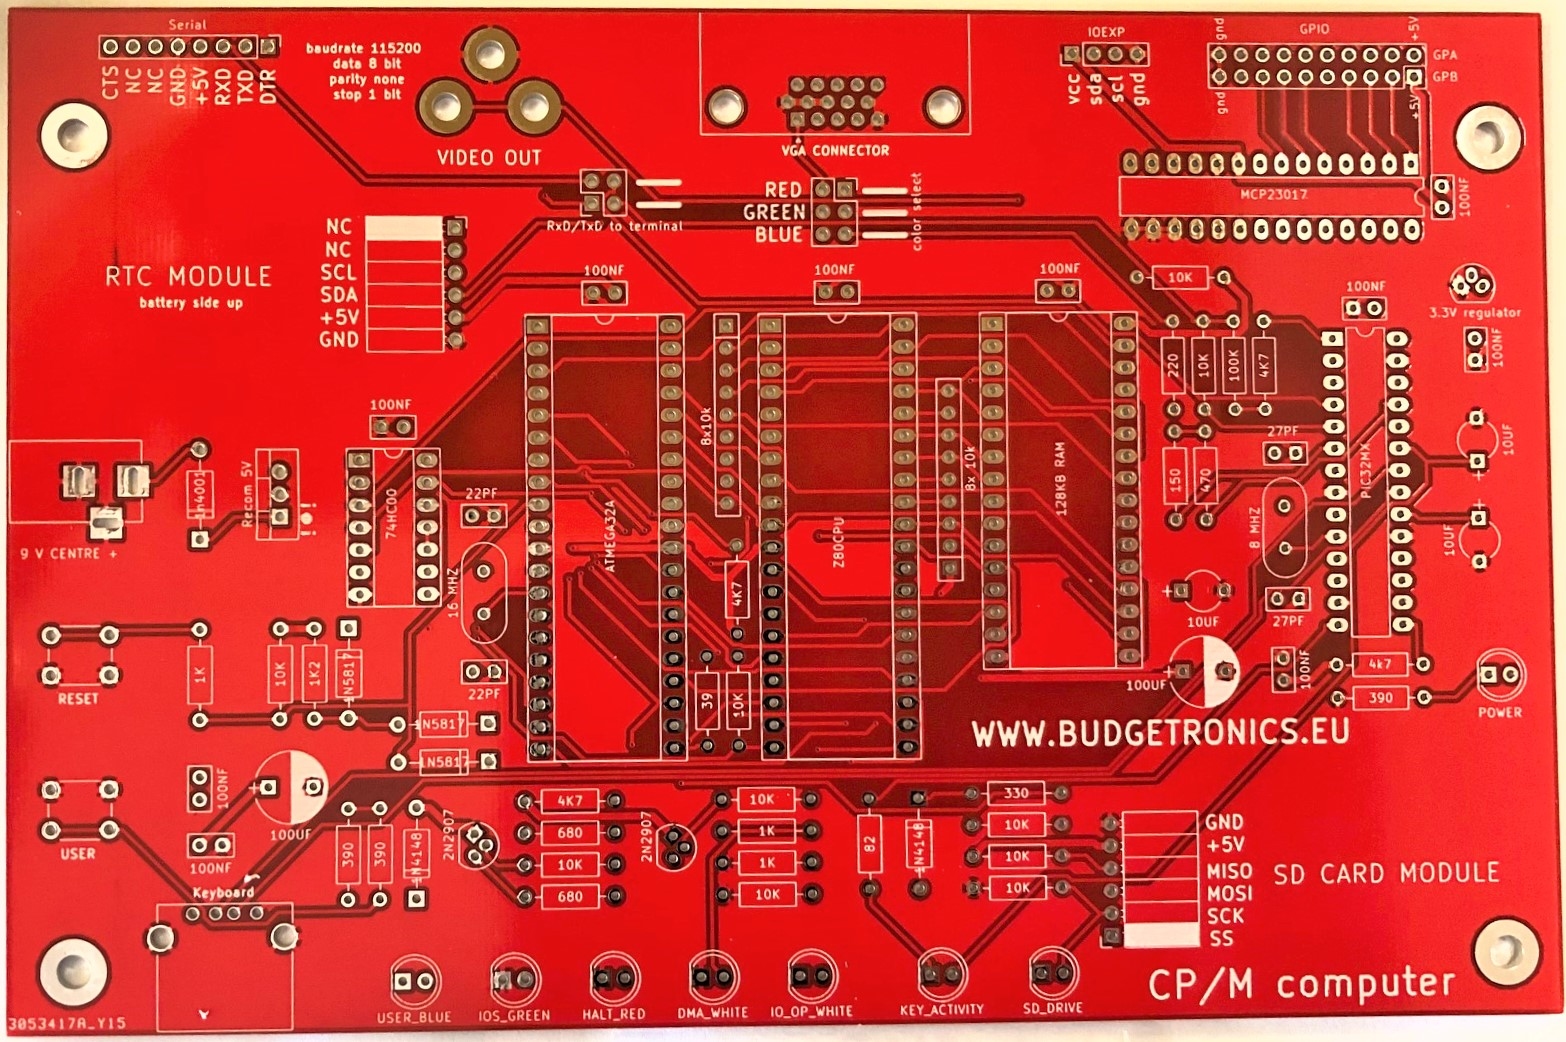 CP/M computer building kit with SD drive and VGA output